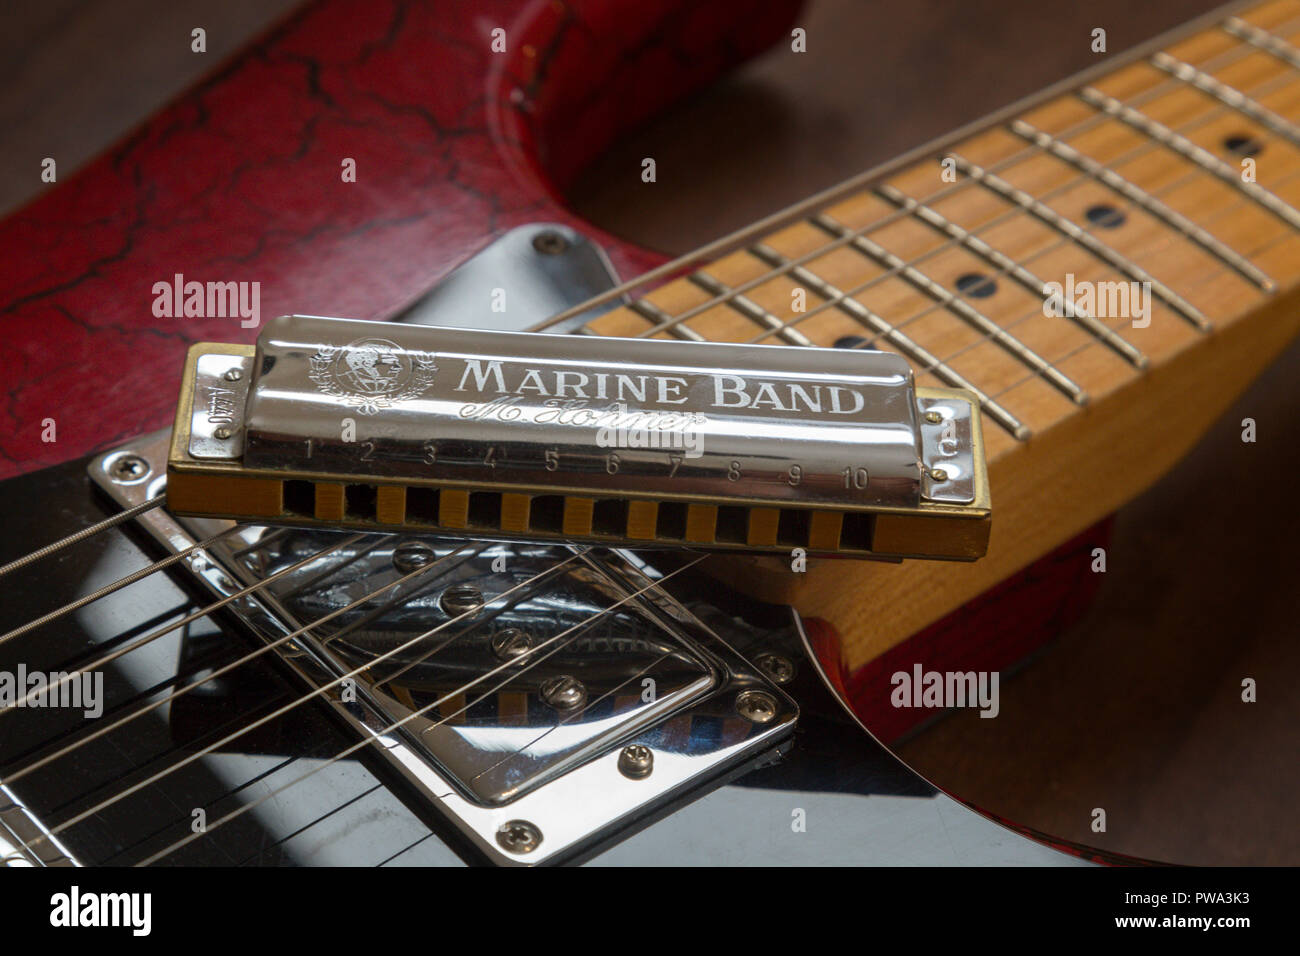 Old electric guitar and harmonica, Hohner Marine Band Stock Photo ...